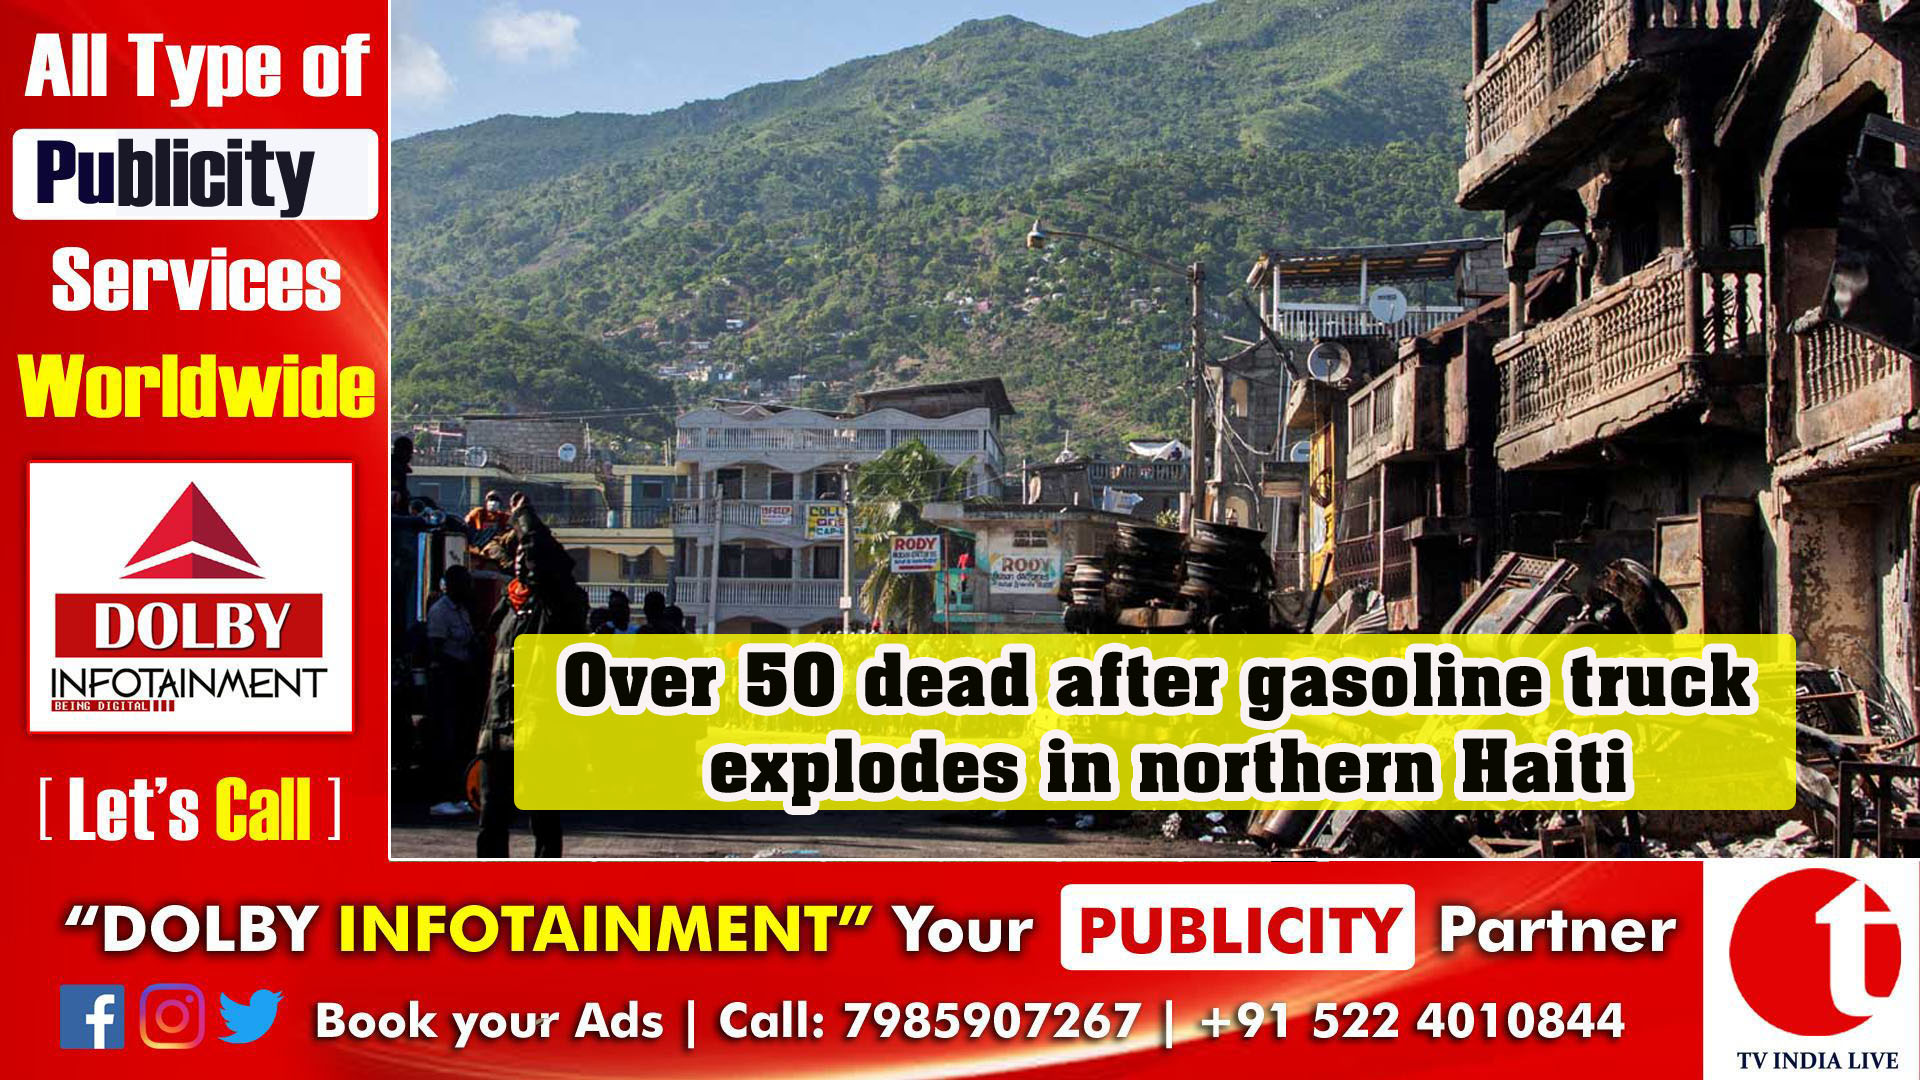 Over 50 dead after gasoline truck explodes in northern Haiti